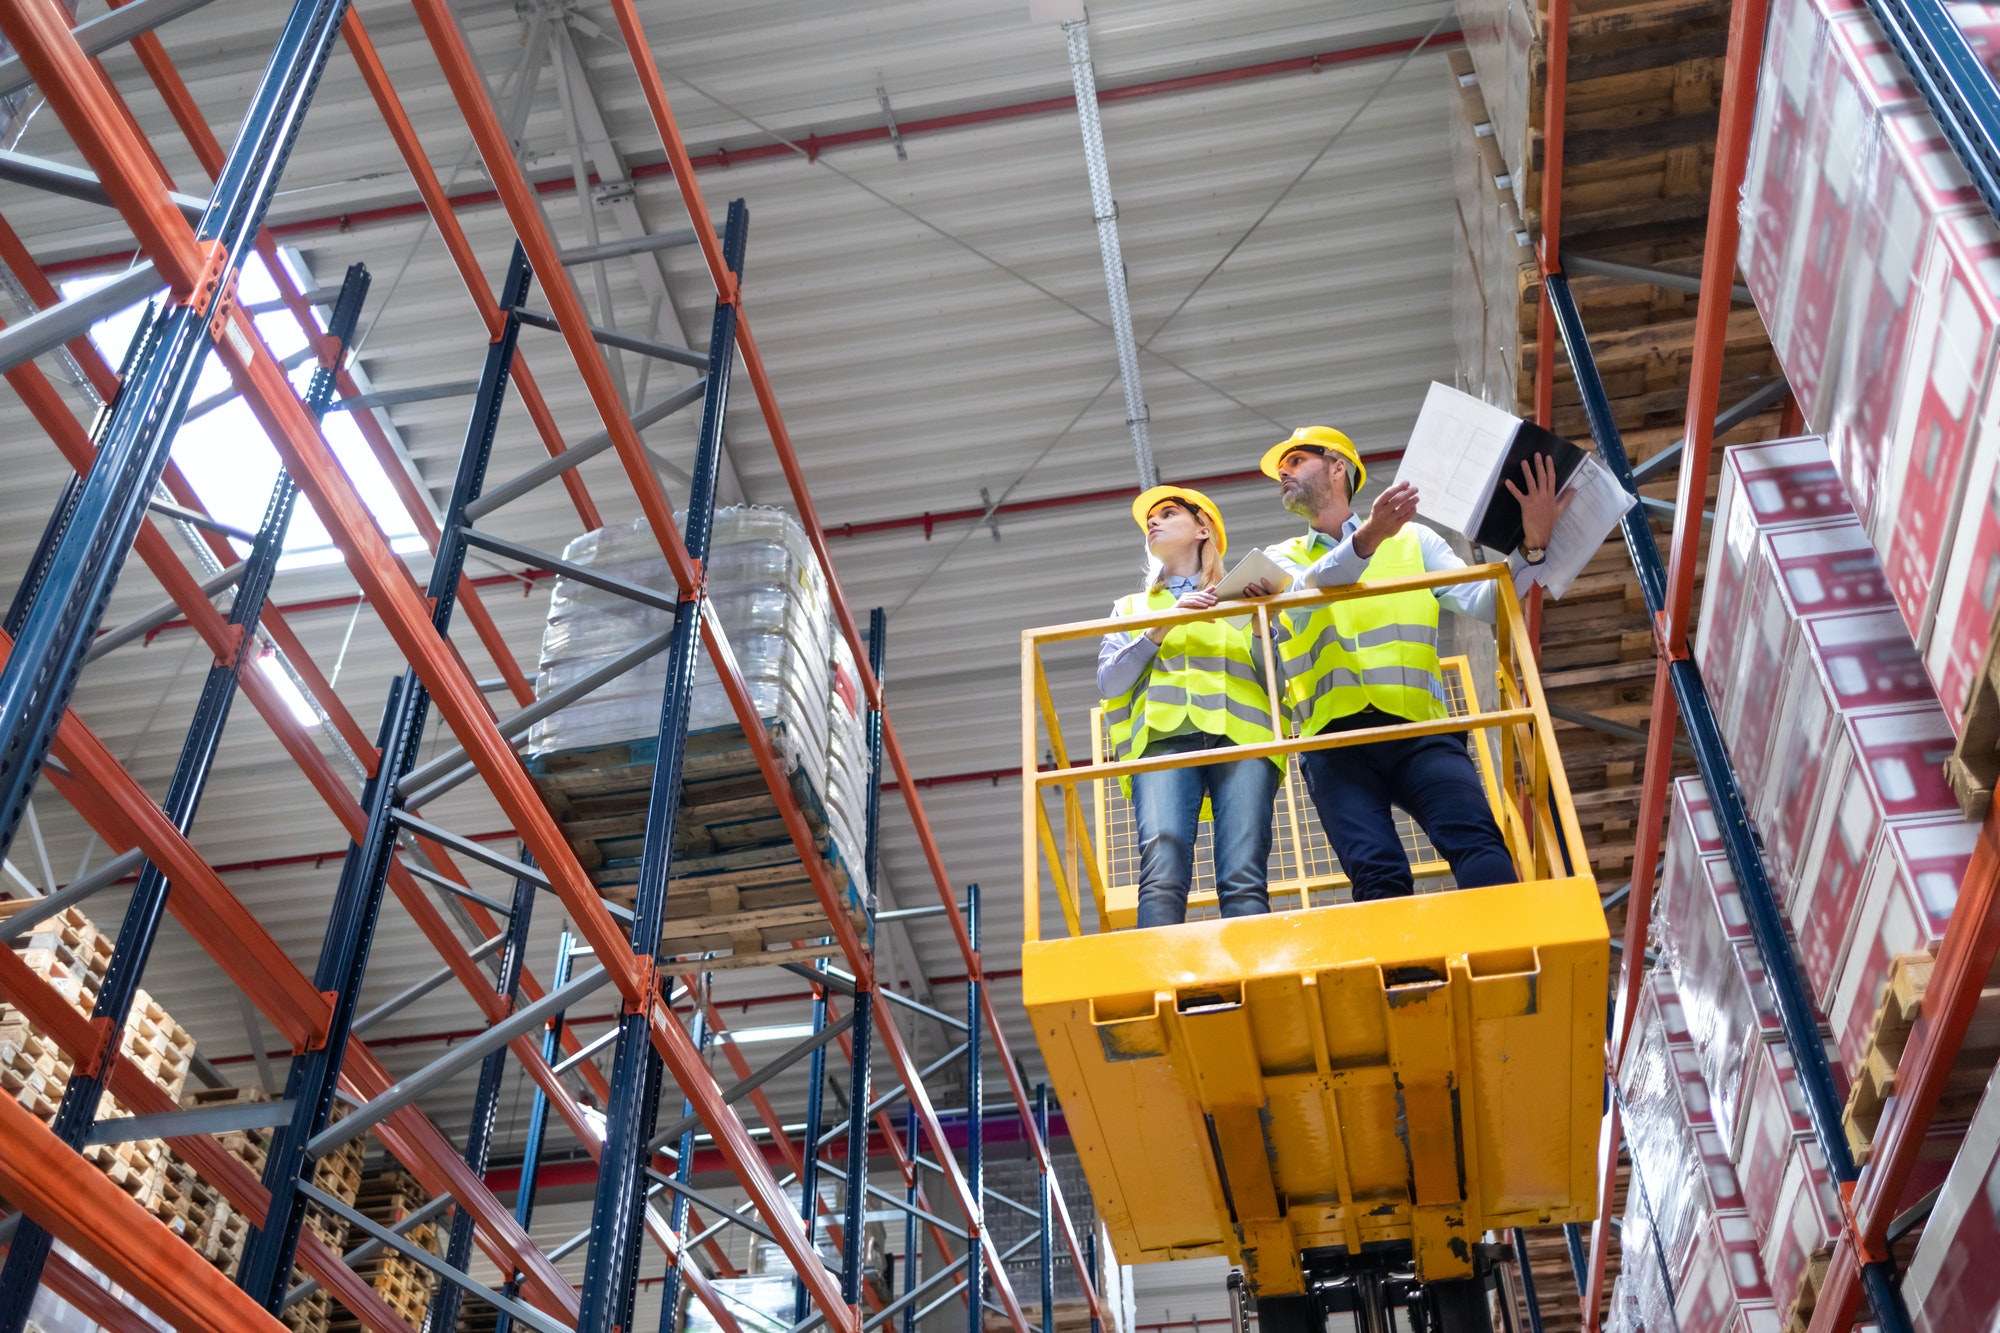 Warehouse workers on the height using lift work platform to check inventory